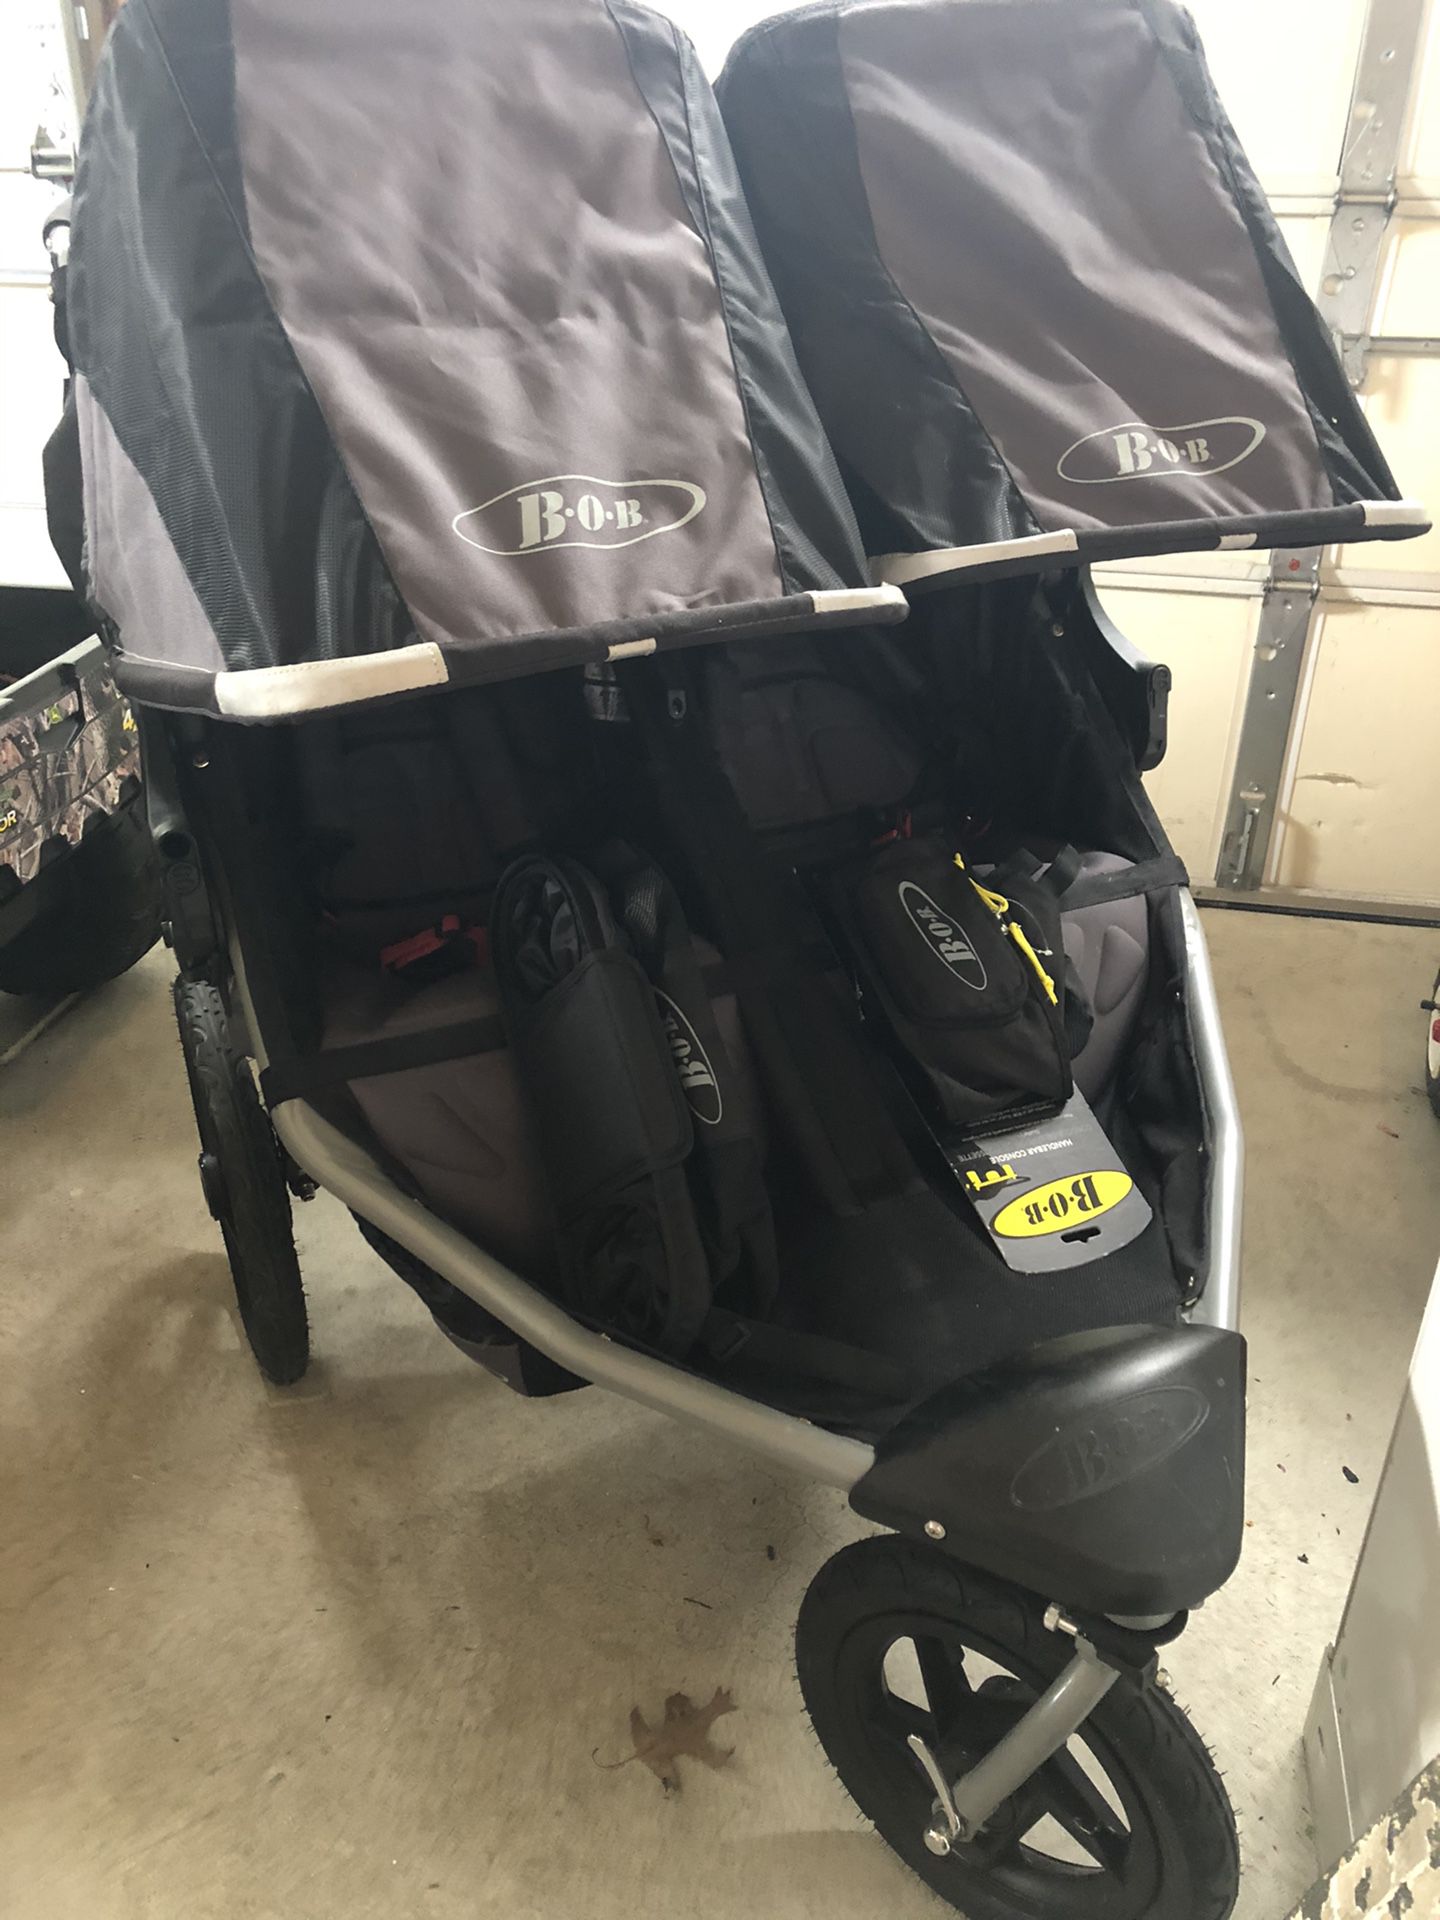 Bob Double Stroller with unused handlebar console and handlebar cup holder.